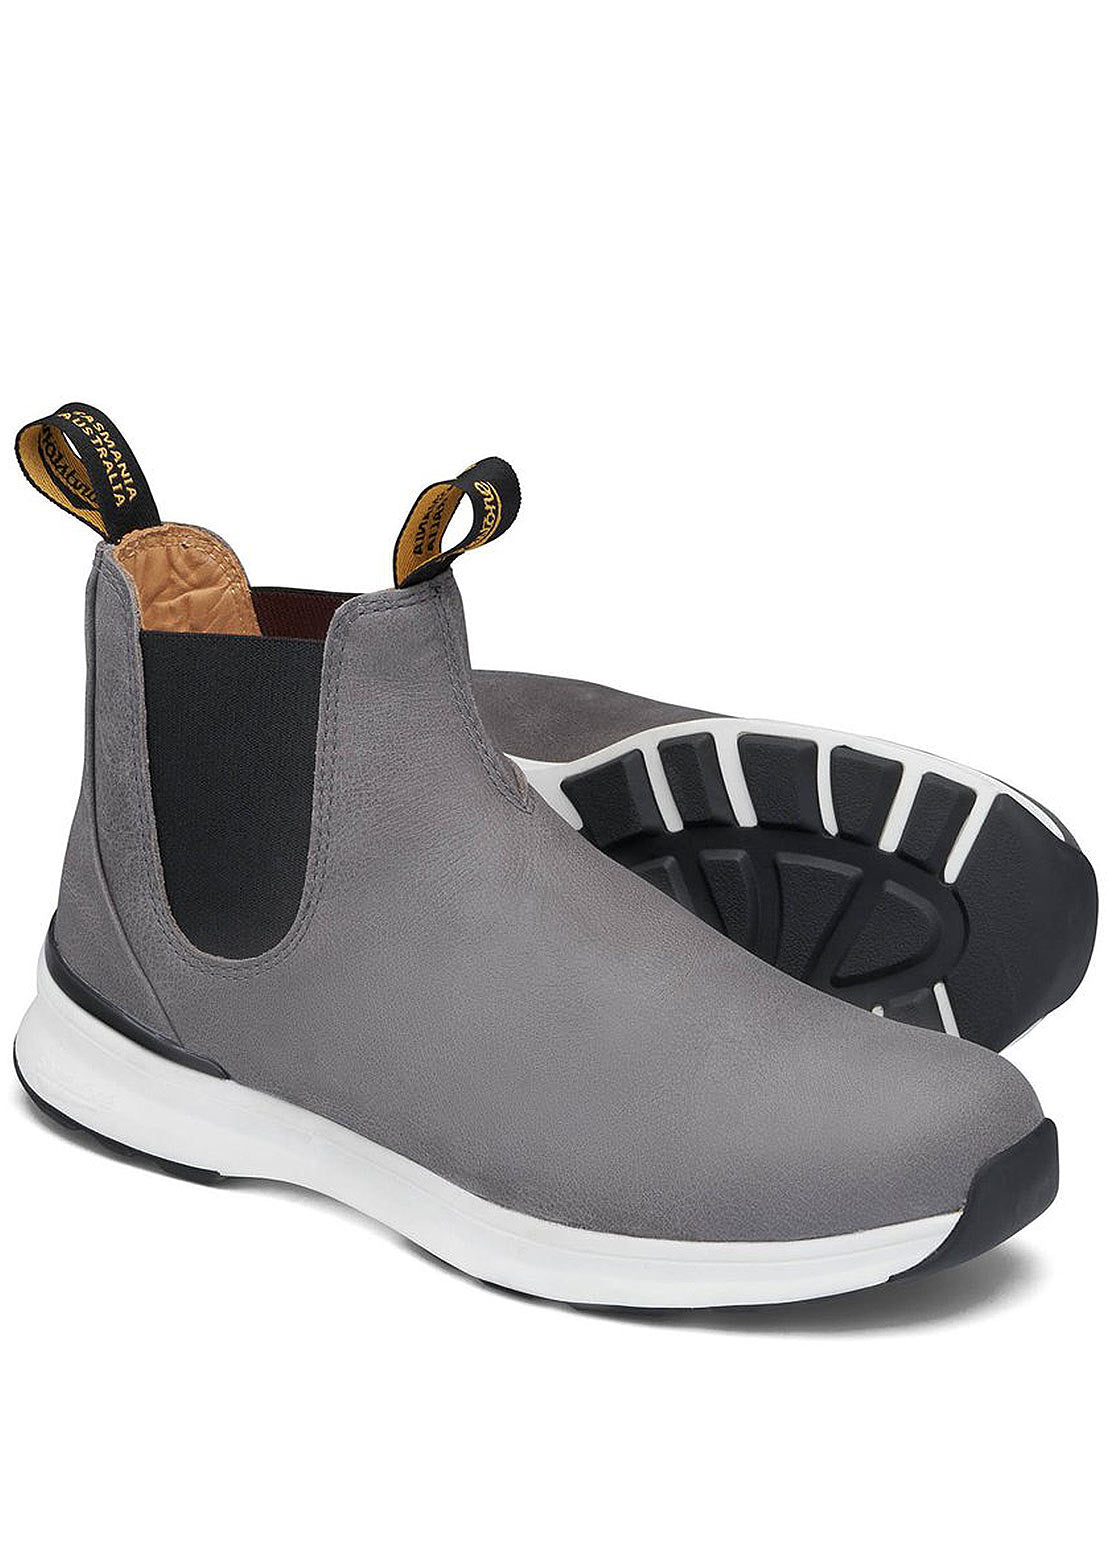 Blundstone 2141 New Active Boots Dusty Grey